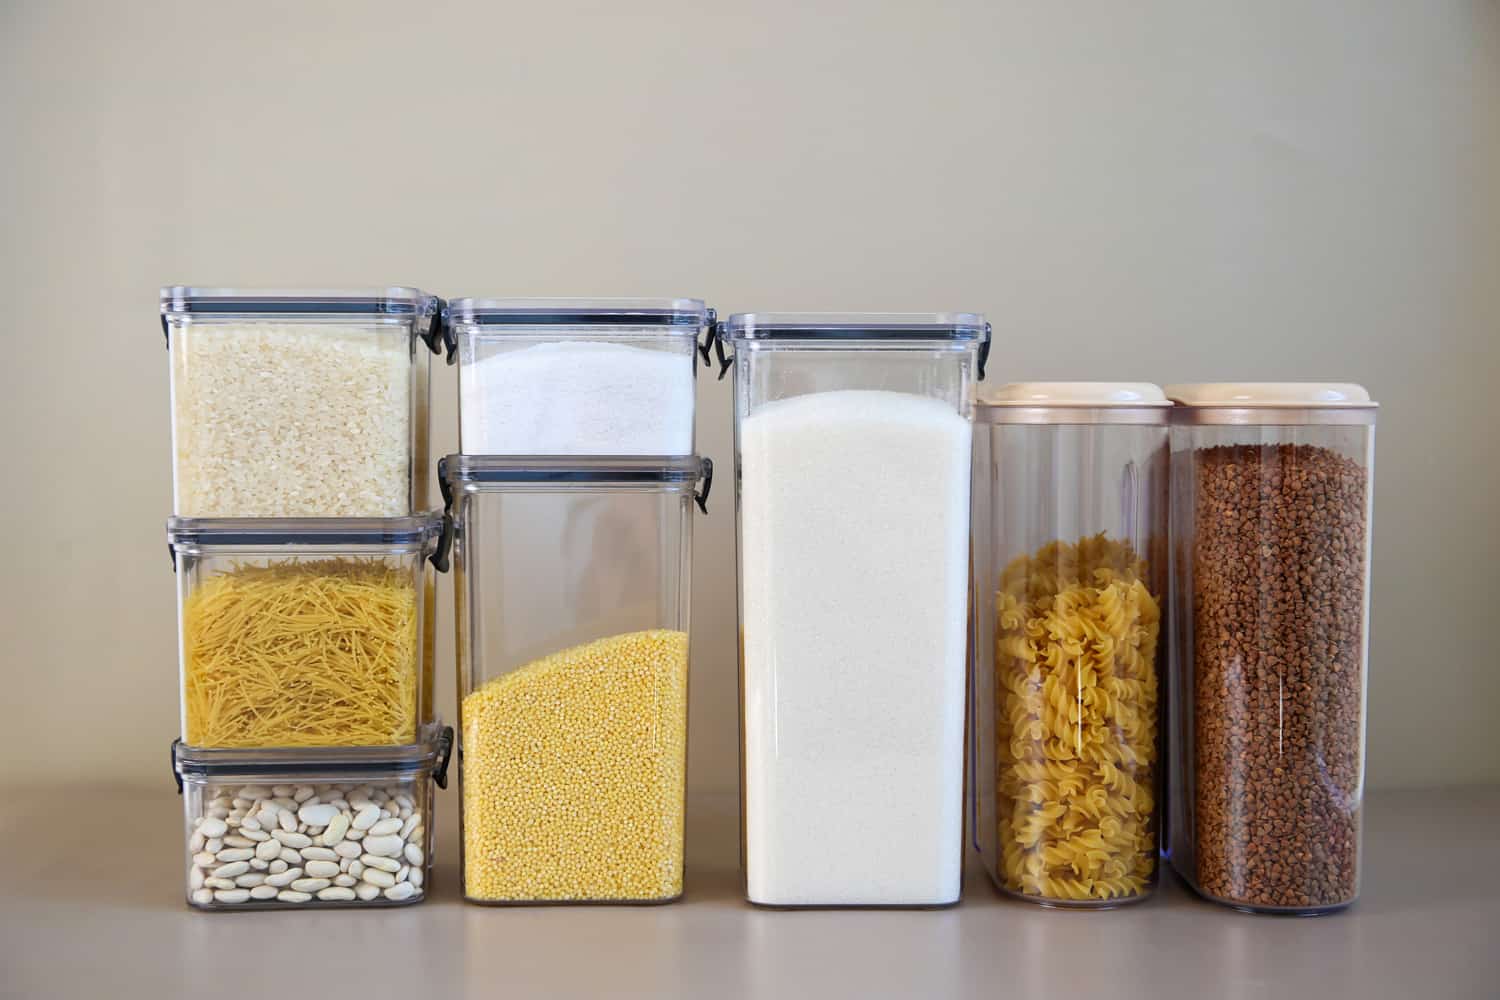 Containers for storing bulk products in the kitchen.